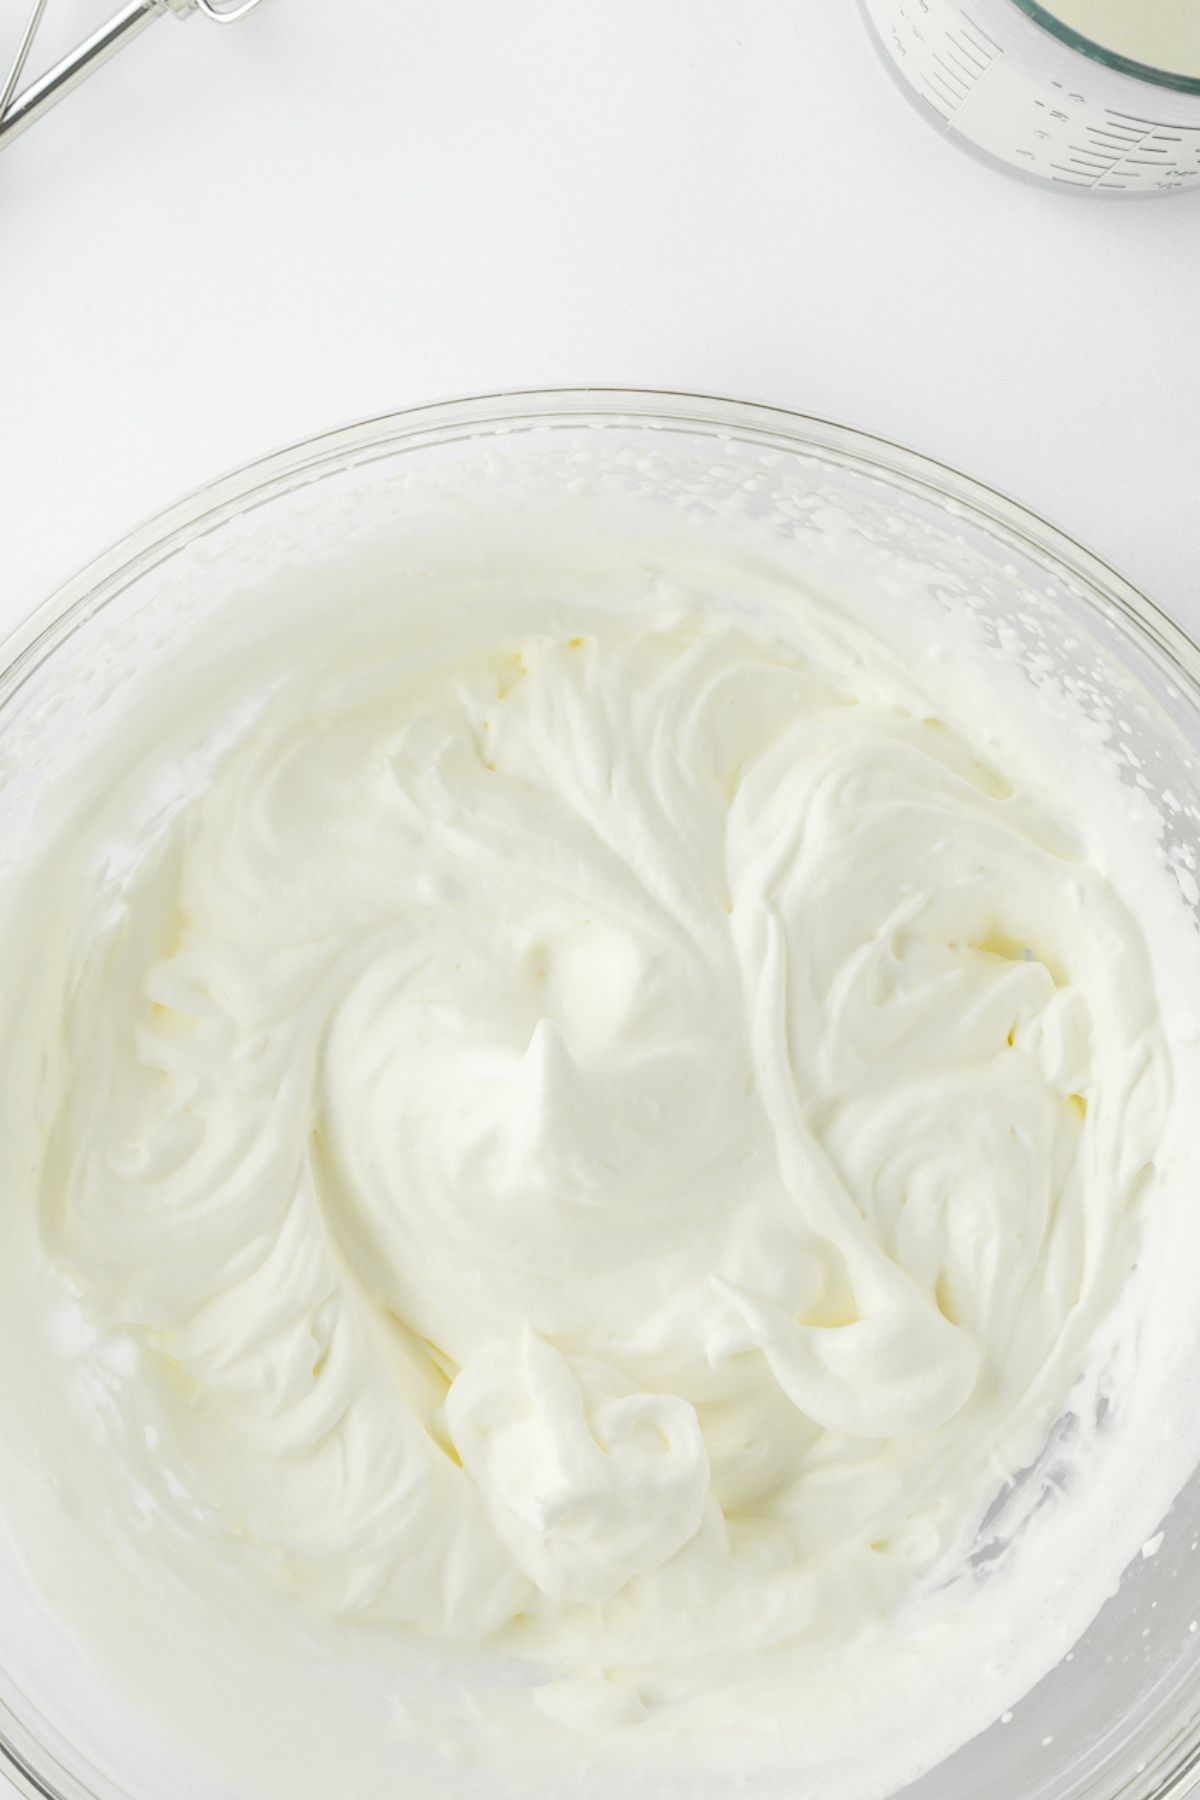 Heavy cream that has been whipped into whipped cream.